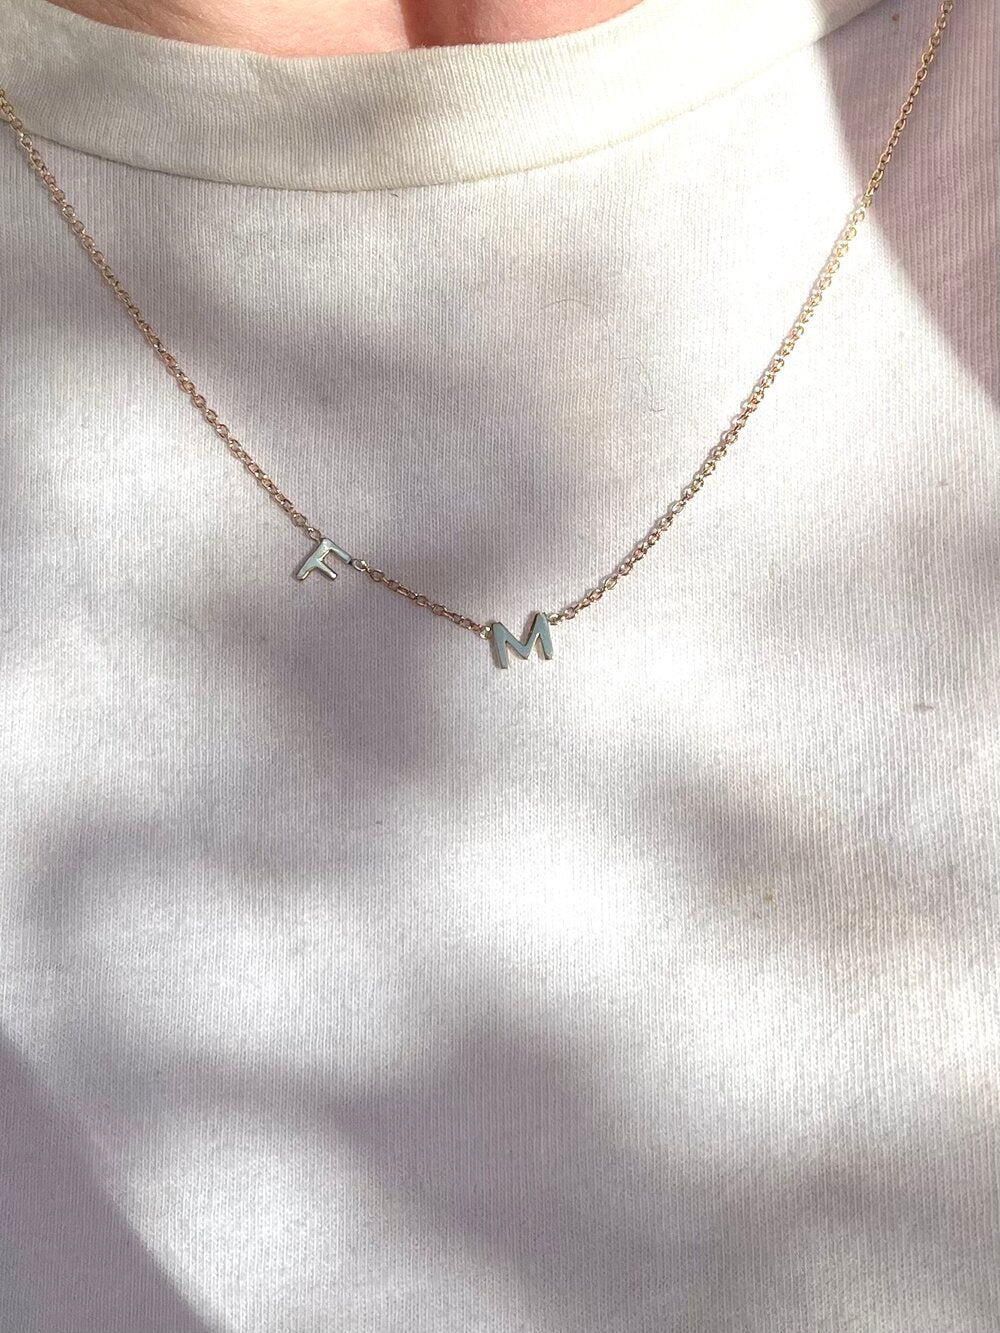 Tiny Alphabet Layering Necklace - Minimal Style Solid 9ct Gold Letter Necklace